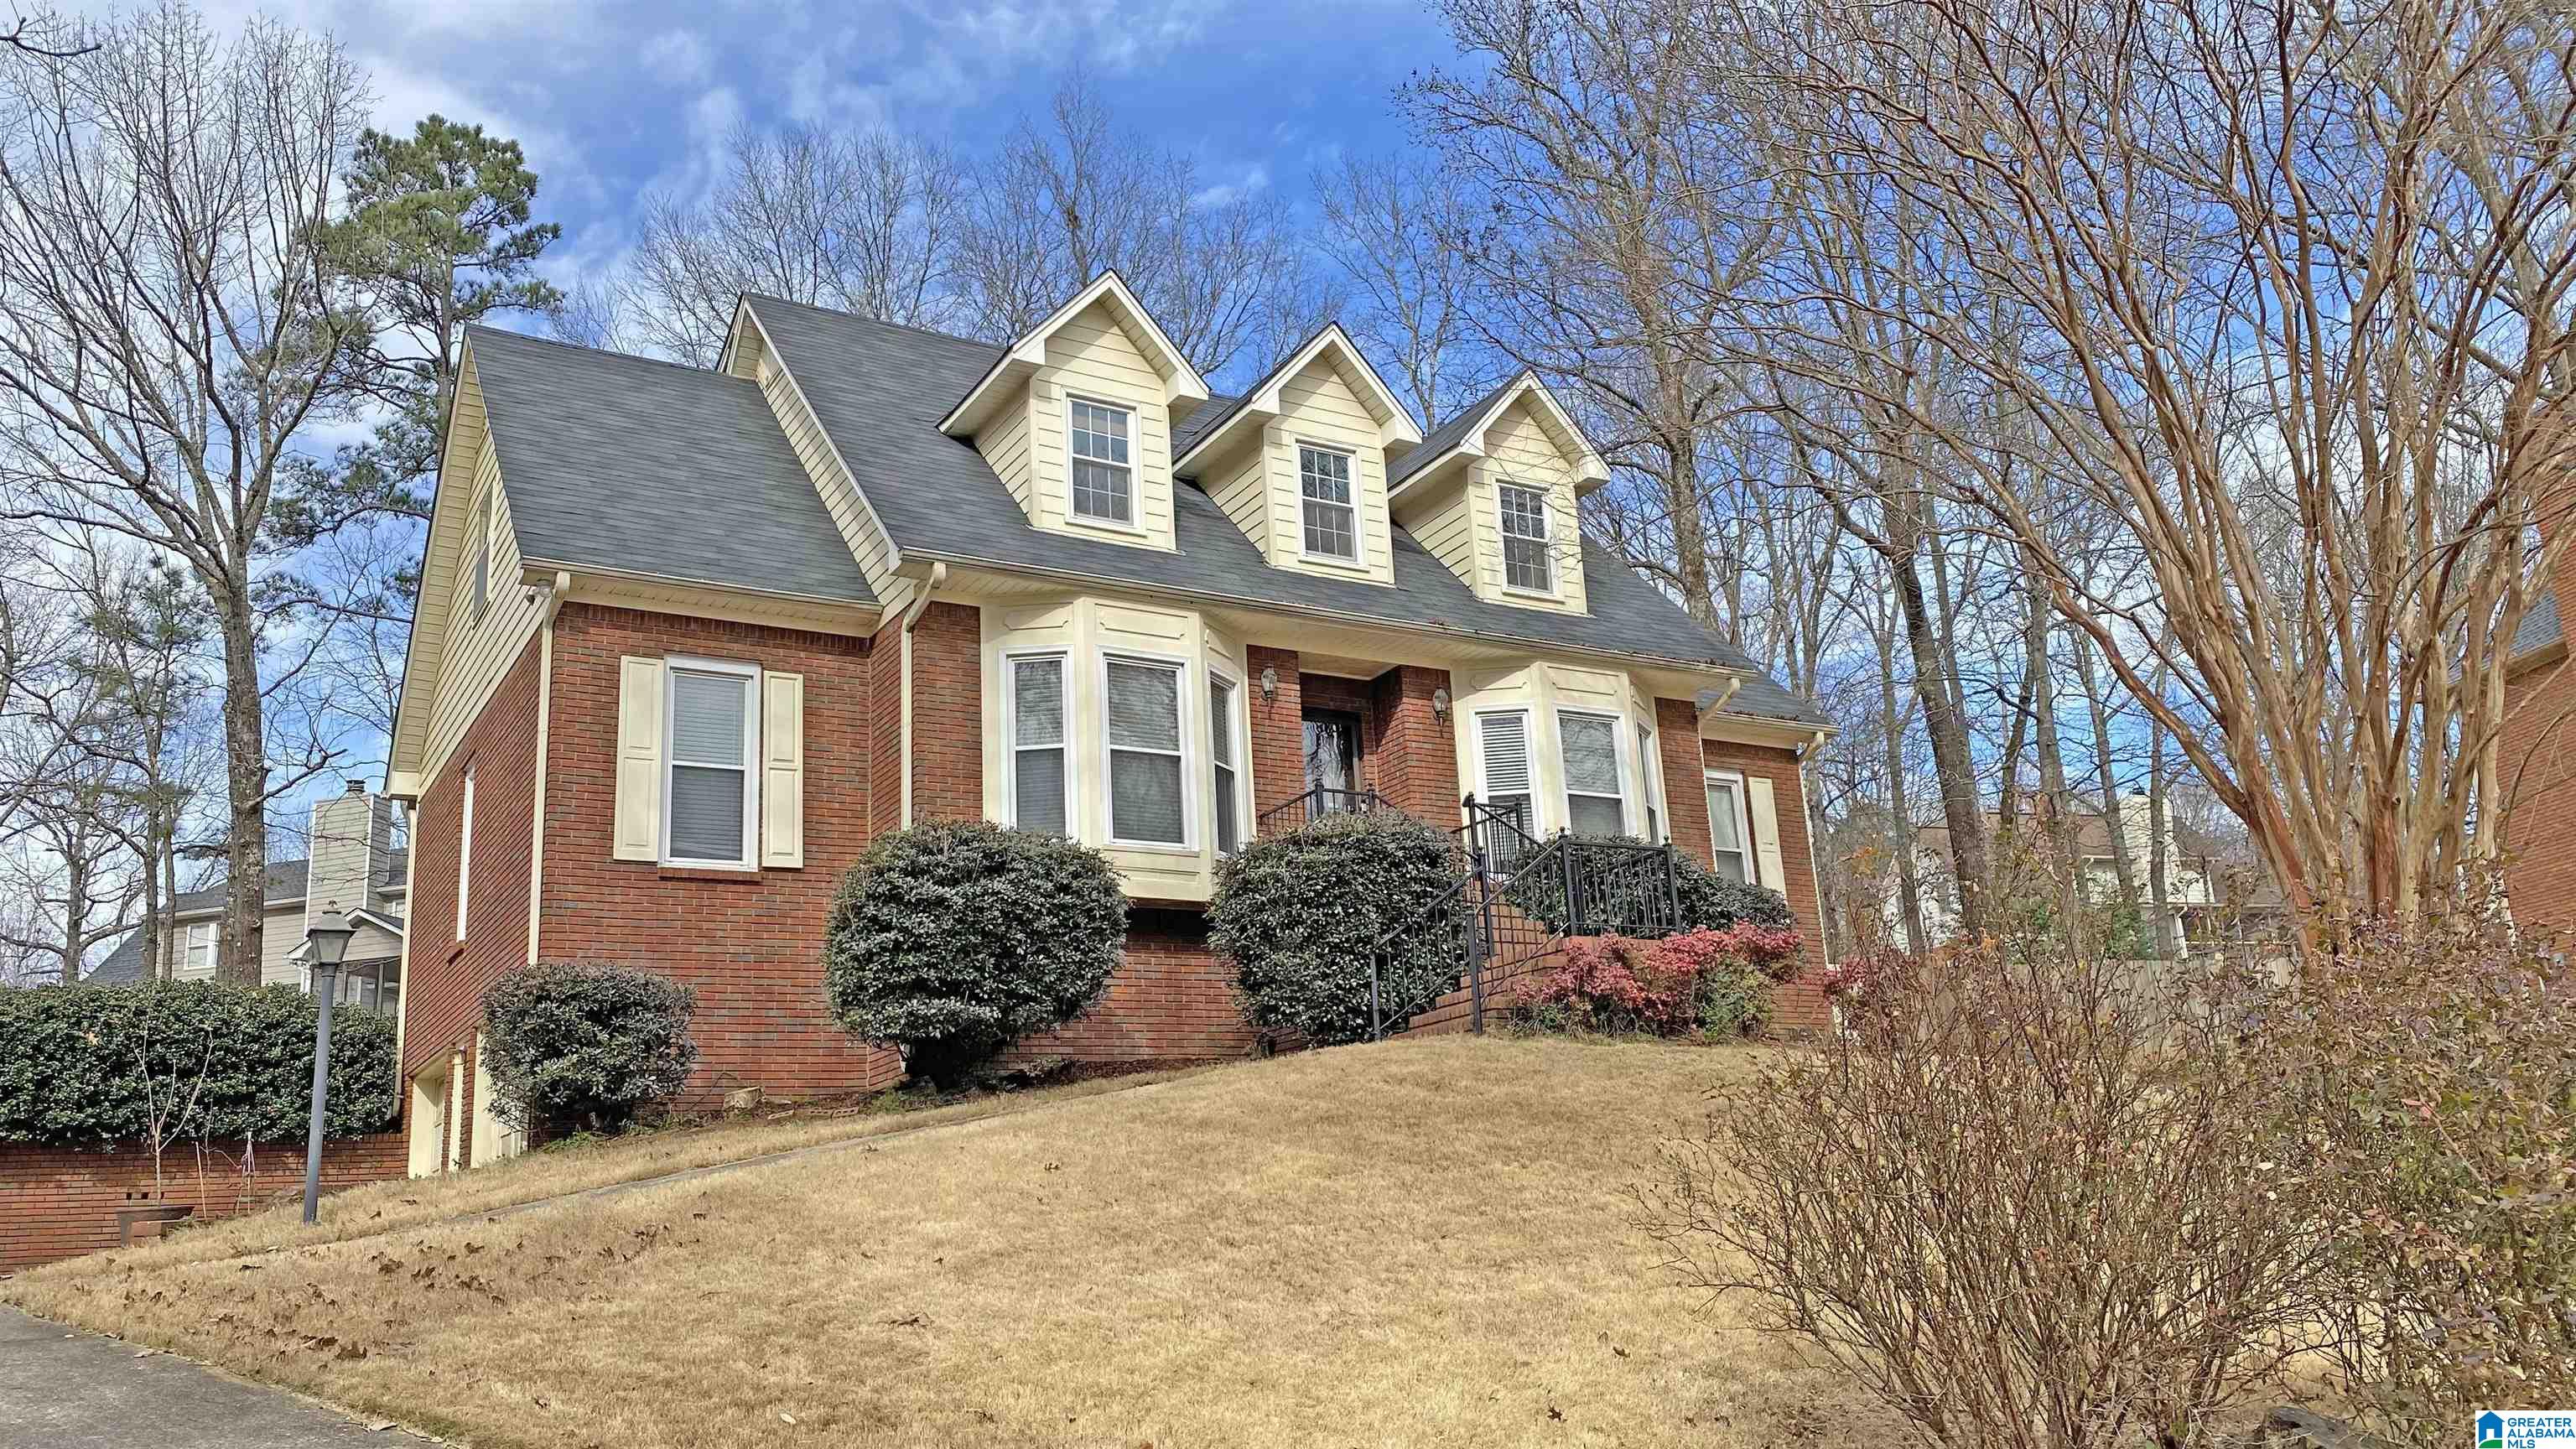 Photo of 1692 MONTEAGLE DRIVE HOOVER